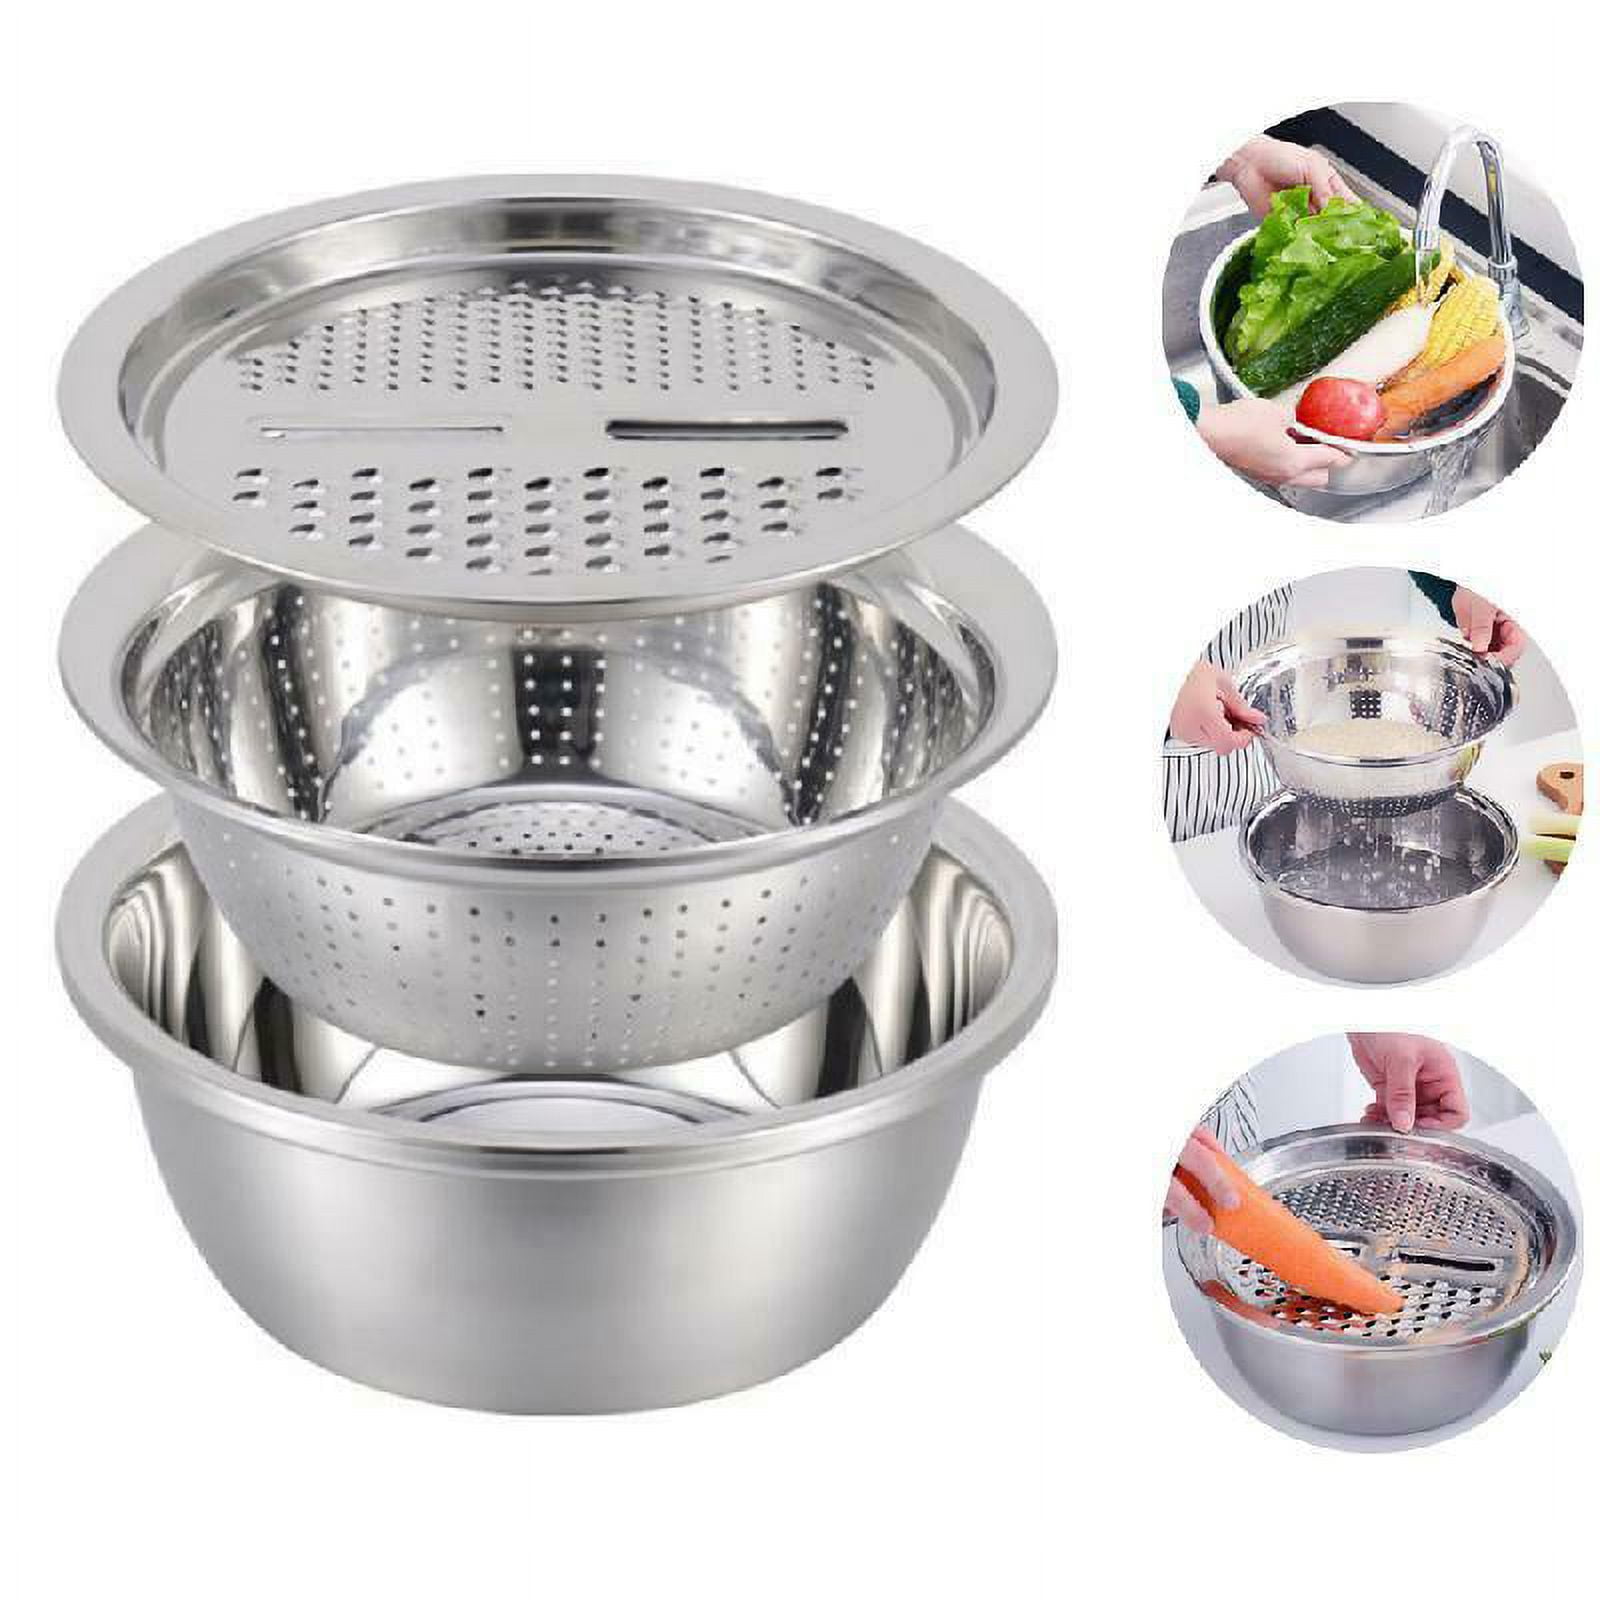  Vegetable Slicer 3 in 1 with Three Nozzles Stainless